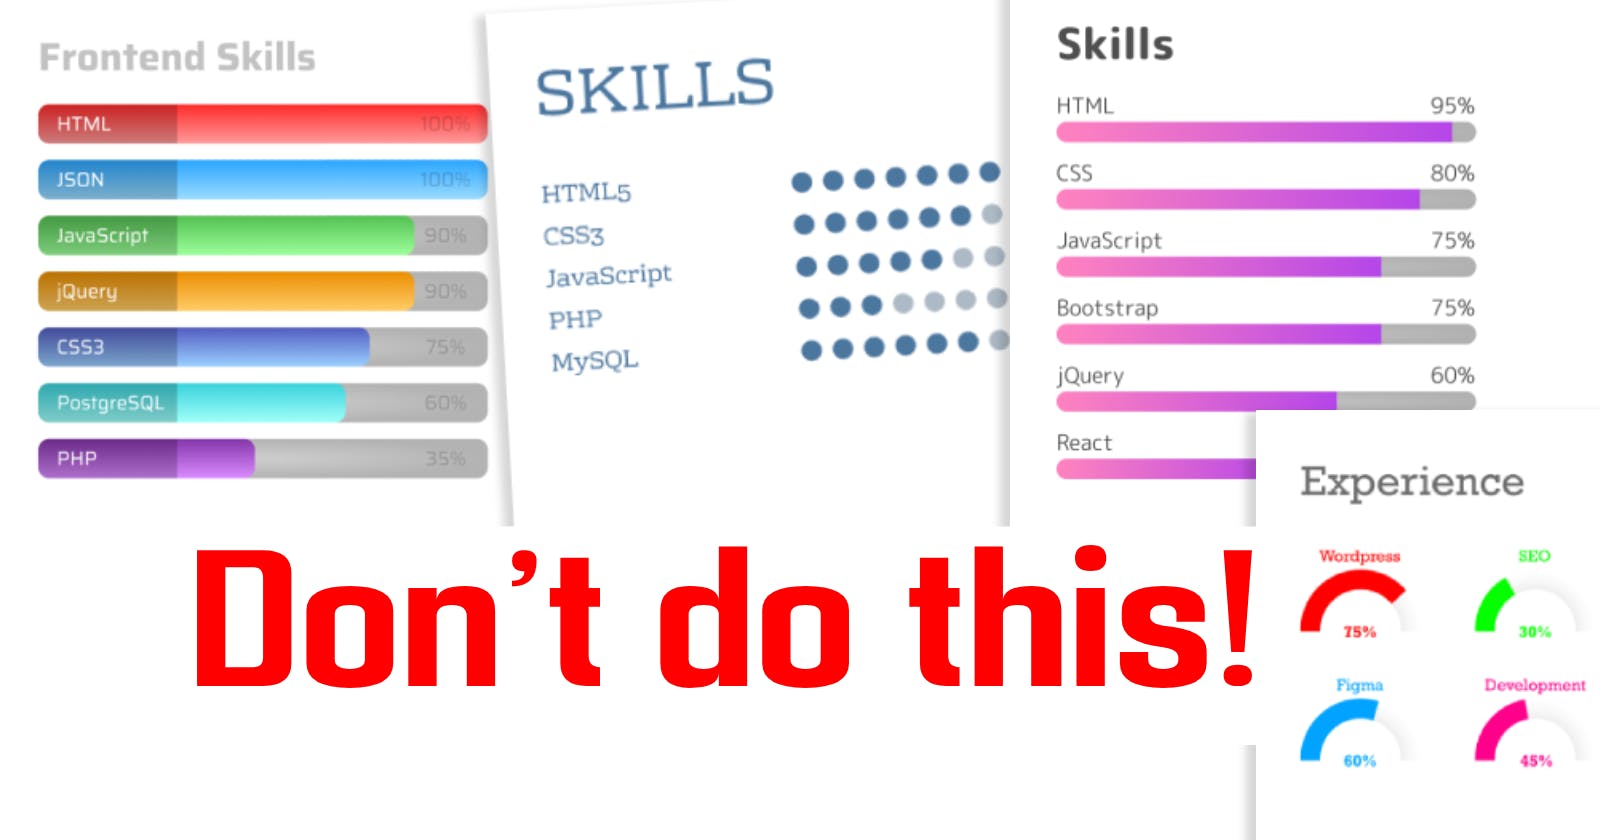 Do not put skill bars on your resume!